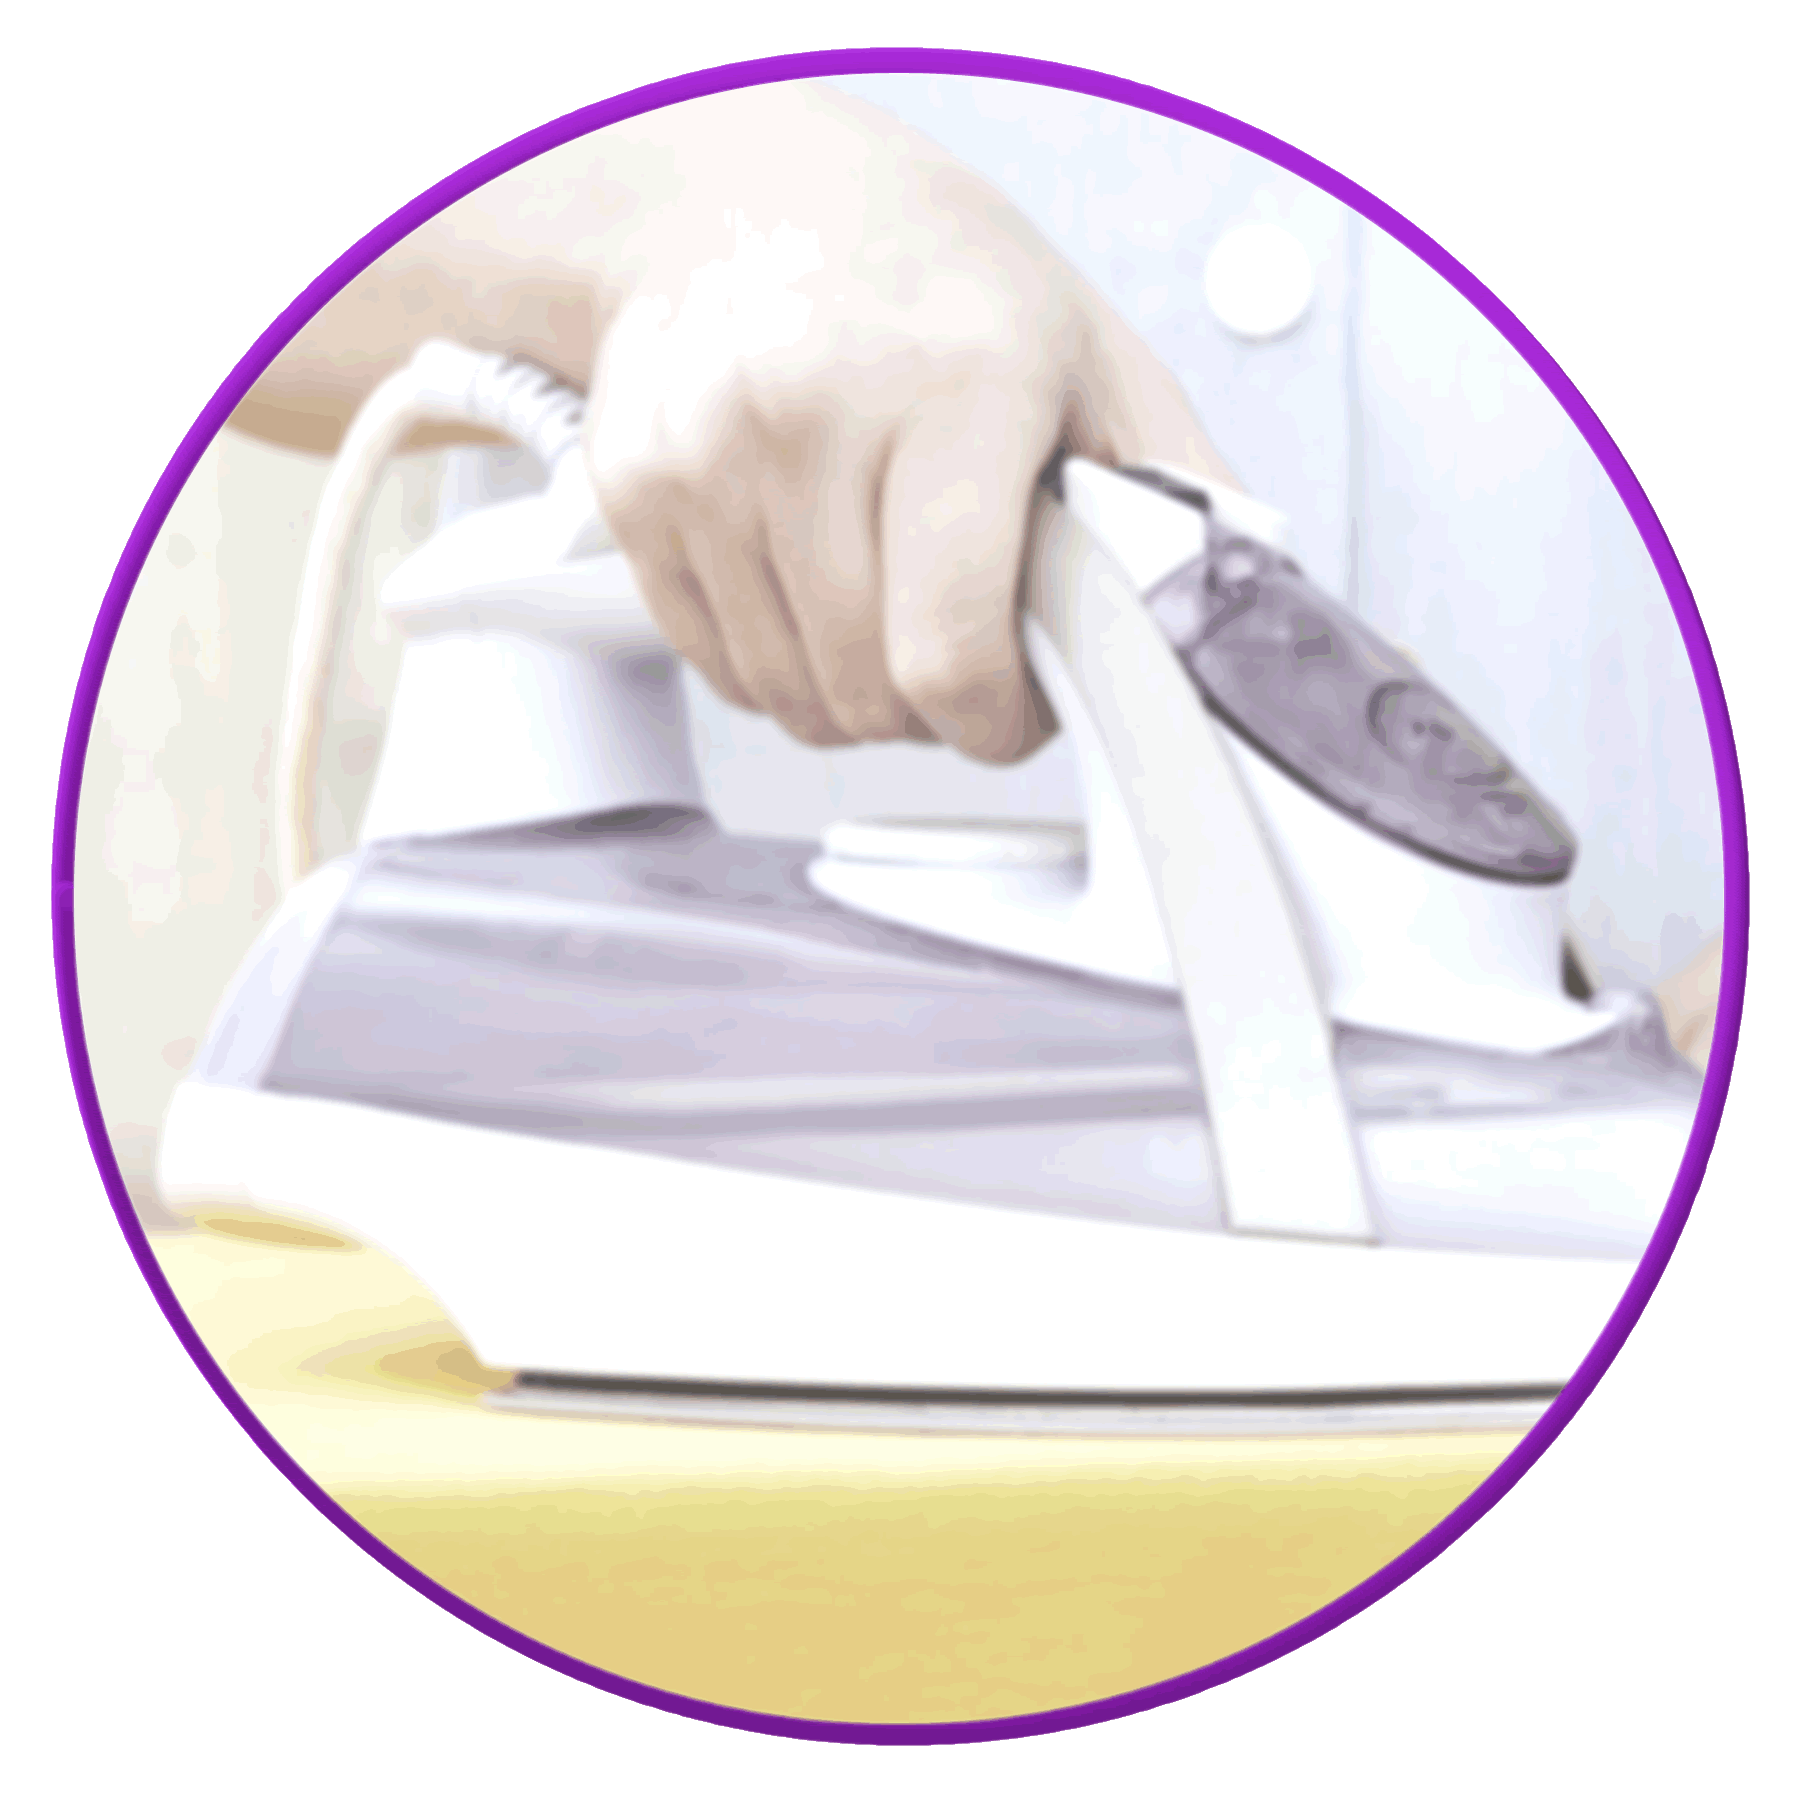 ironing services domestic